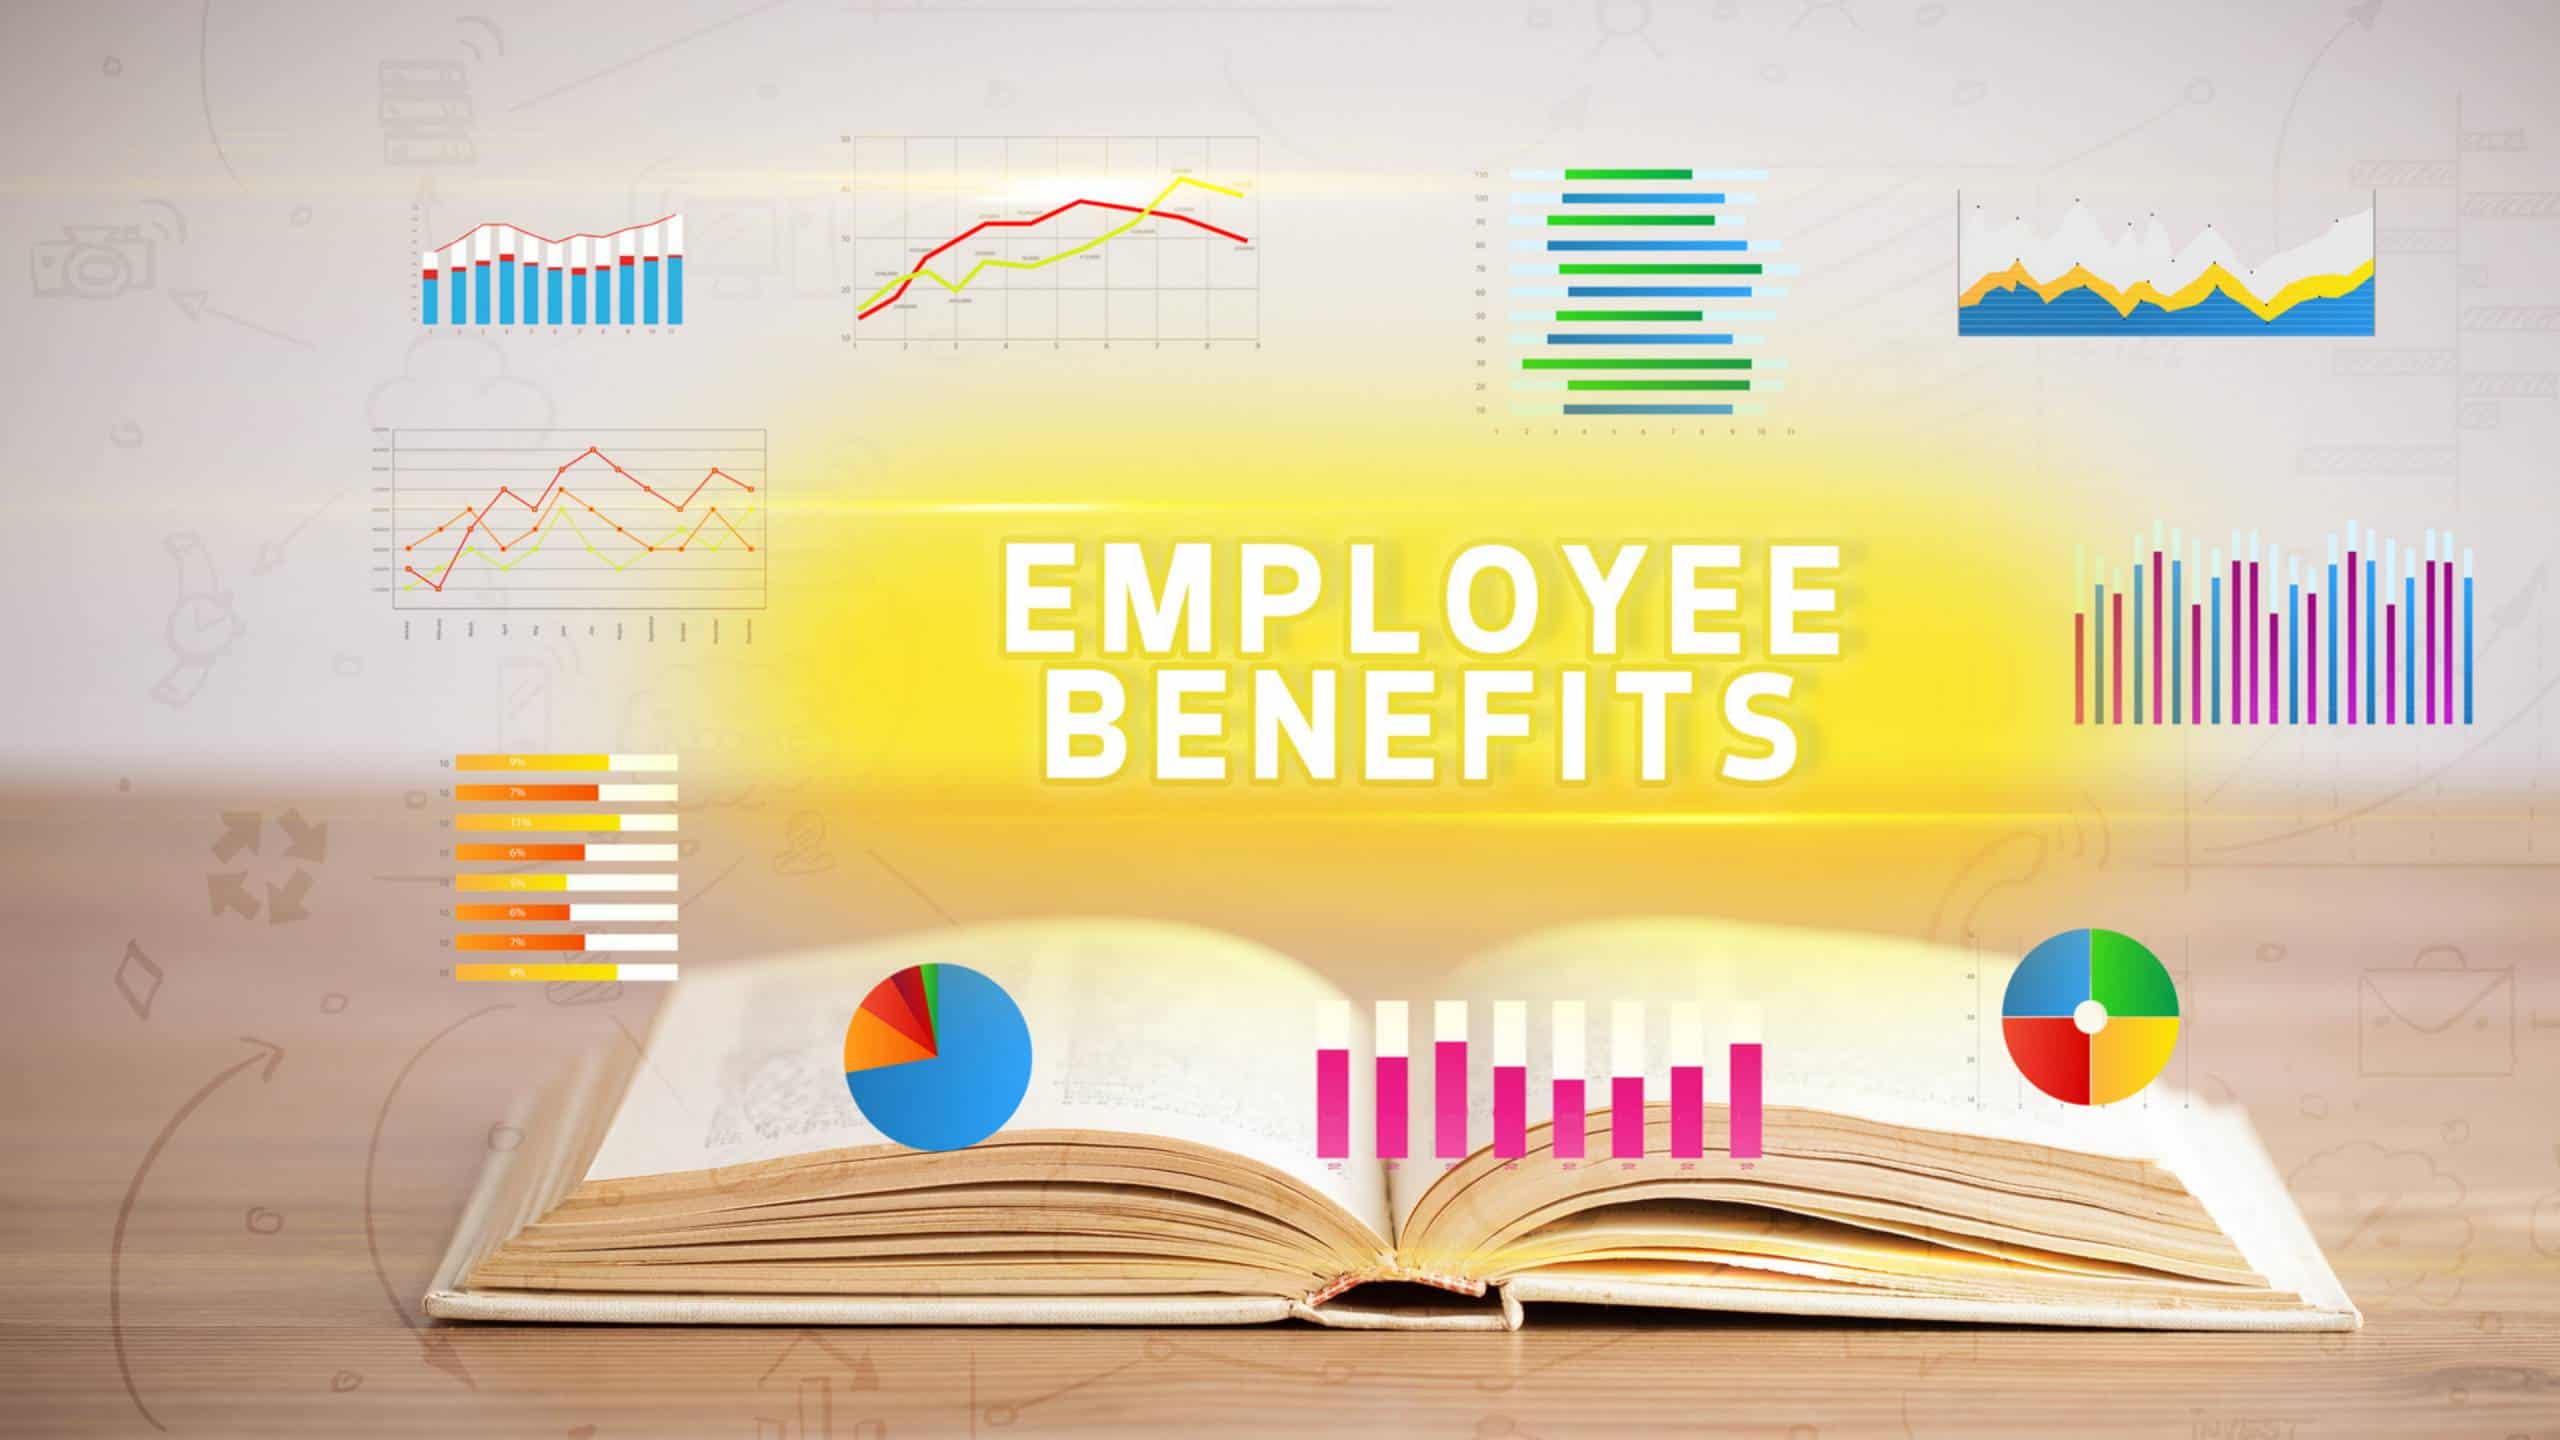 Facebook Post 940x788 px Custom dimensions Custom dimensions Custom dimensions Custom dimensions scaled The employee benefits lifecycle